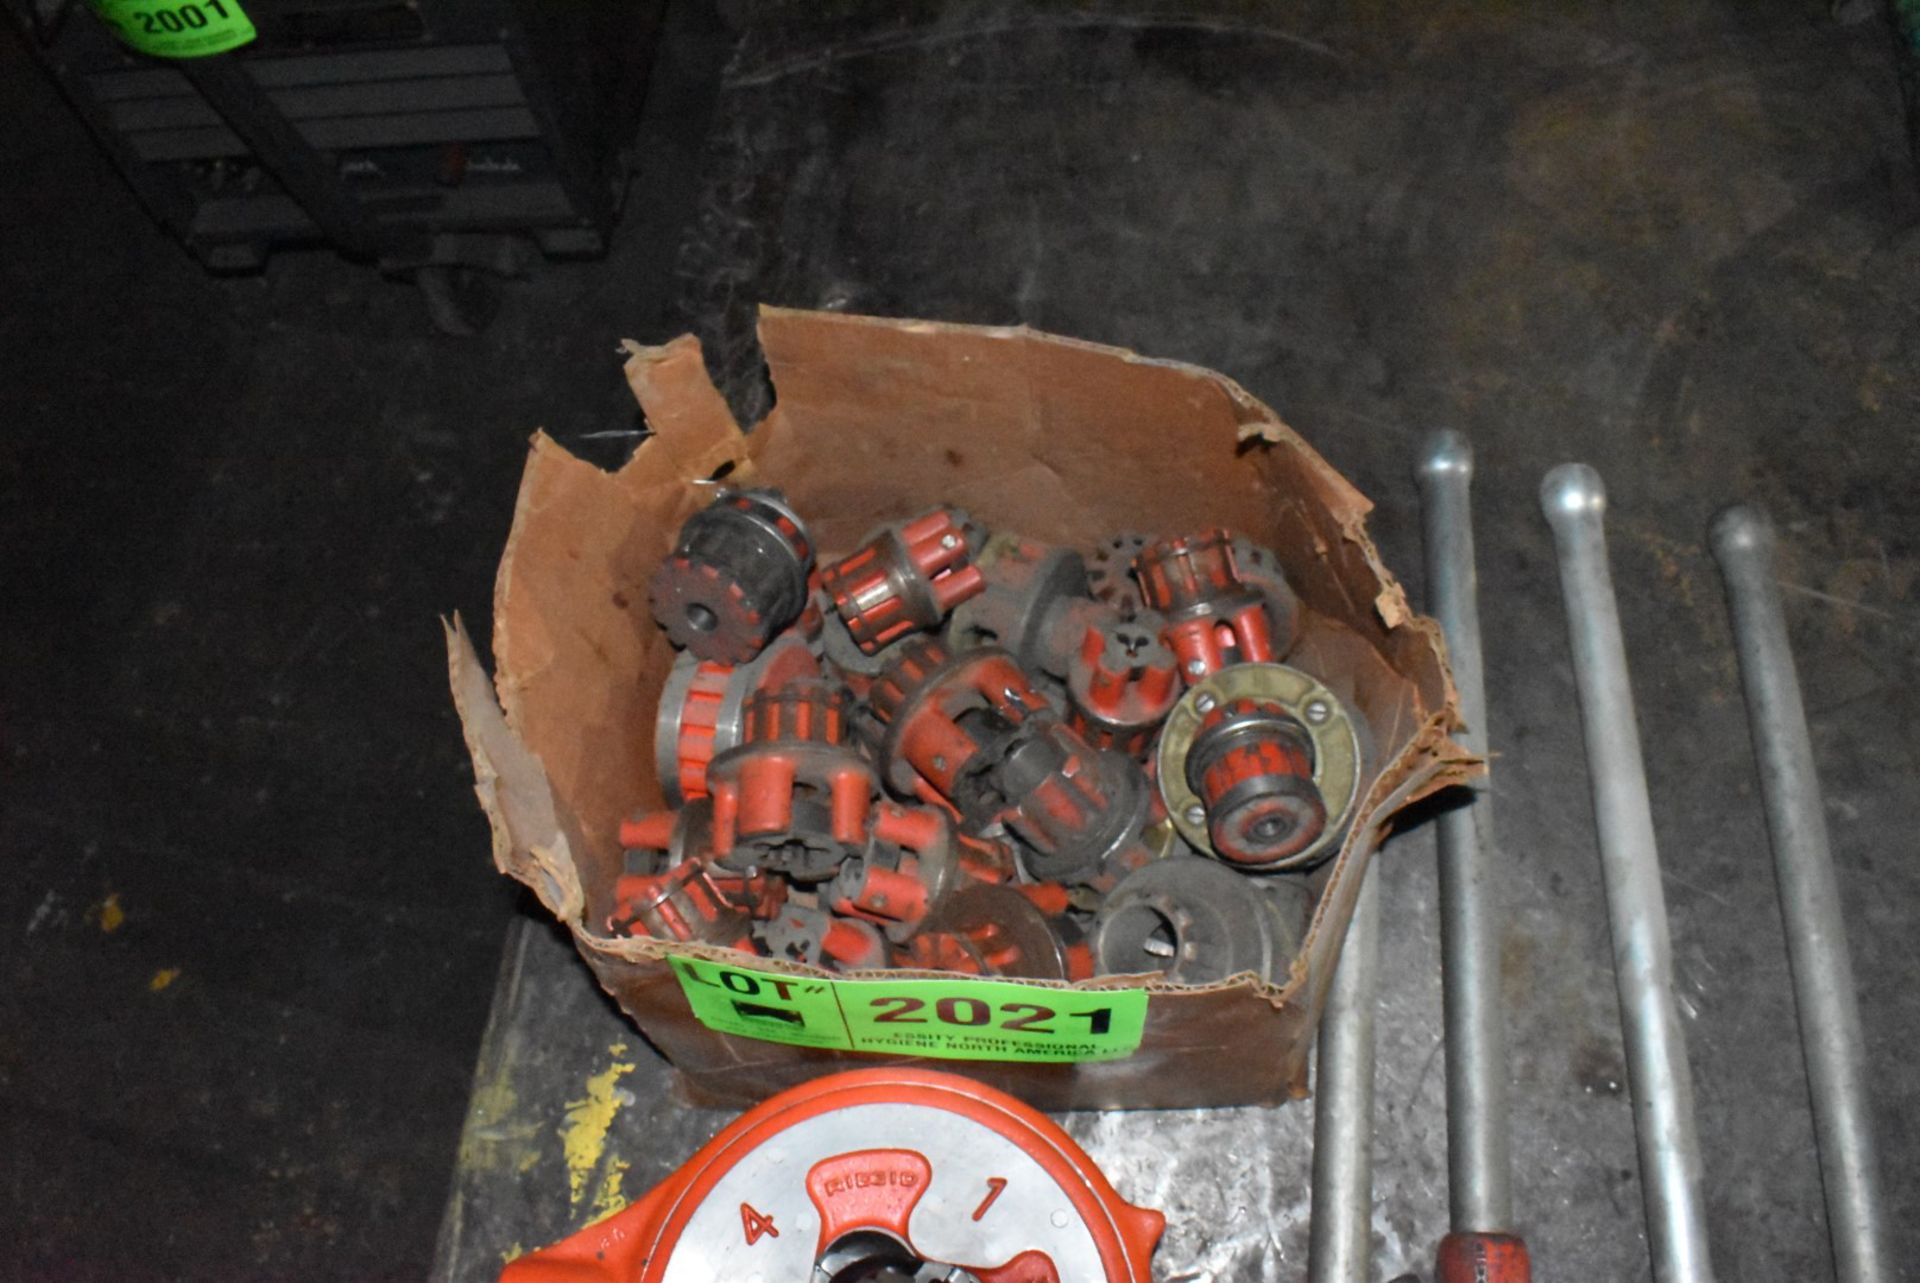 LOT/ MANUAL PIPE TREADER AND DIES [RIGGING FEES FOR LOT #2021 - $50 USD PLUS APPLICABLE TAXES] - Image 2 of 2